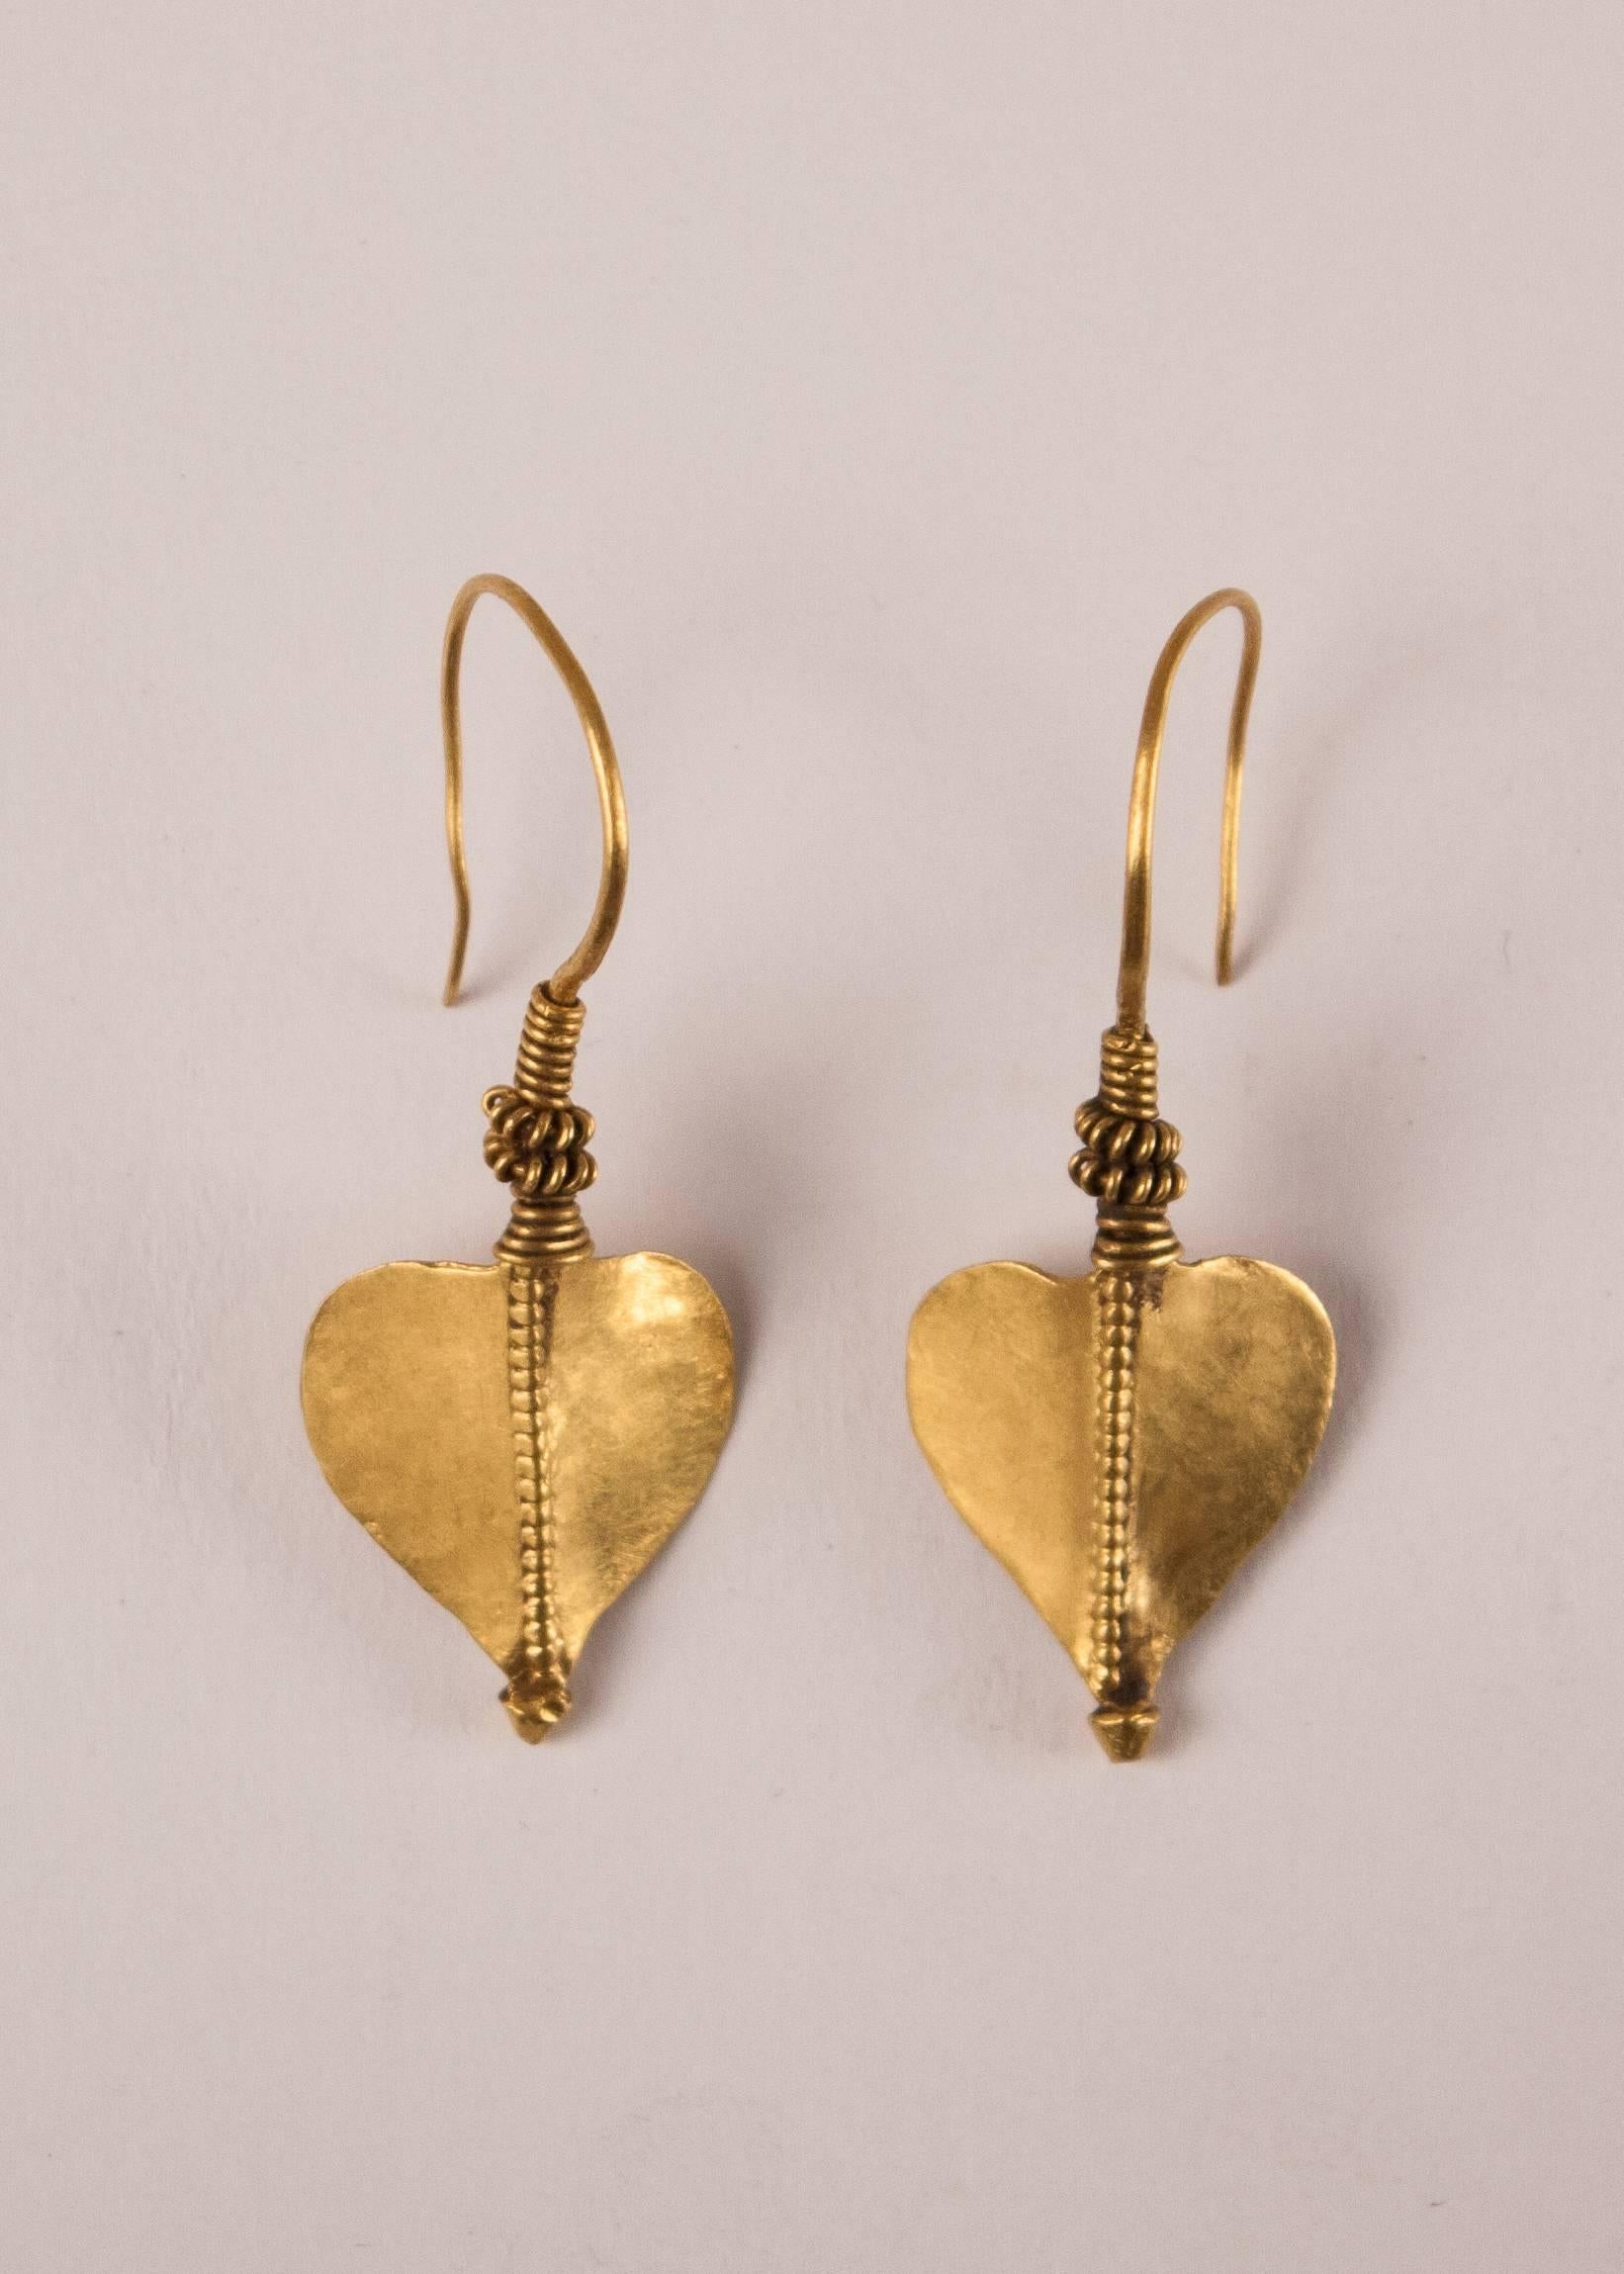 A collector's pair of traditional 22-karat gold earrings, circa 1930 from Rajasthan, India. These lovely dangle earrings have a hand tooled leaf design that is inspired by the venerated peepal tree. Weight is 3.6 grams per earring. Measurements: